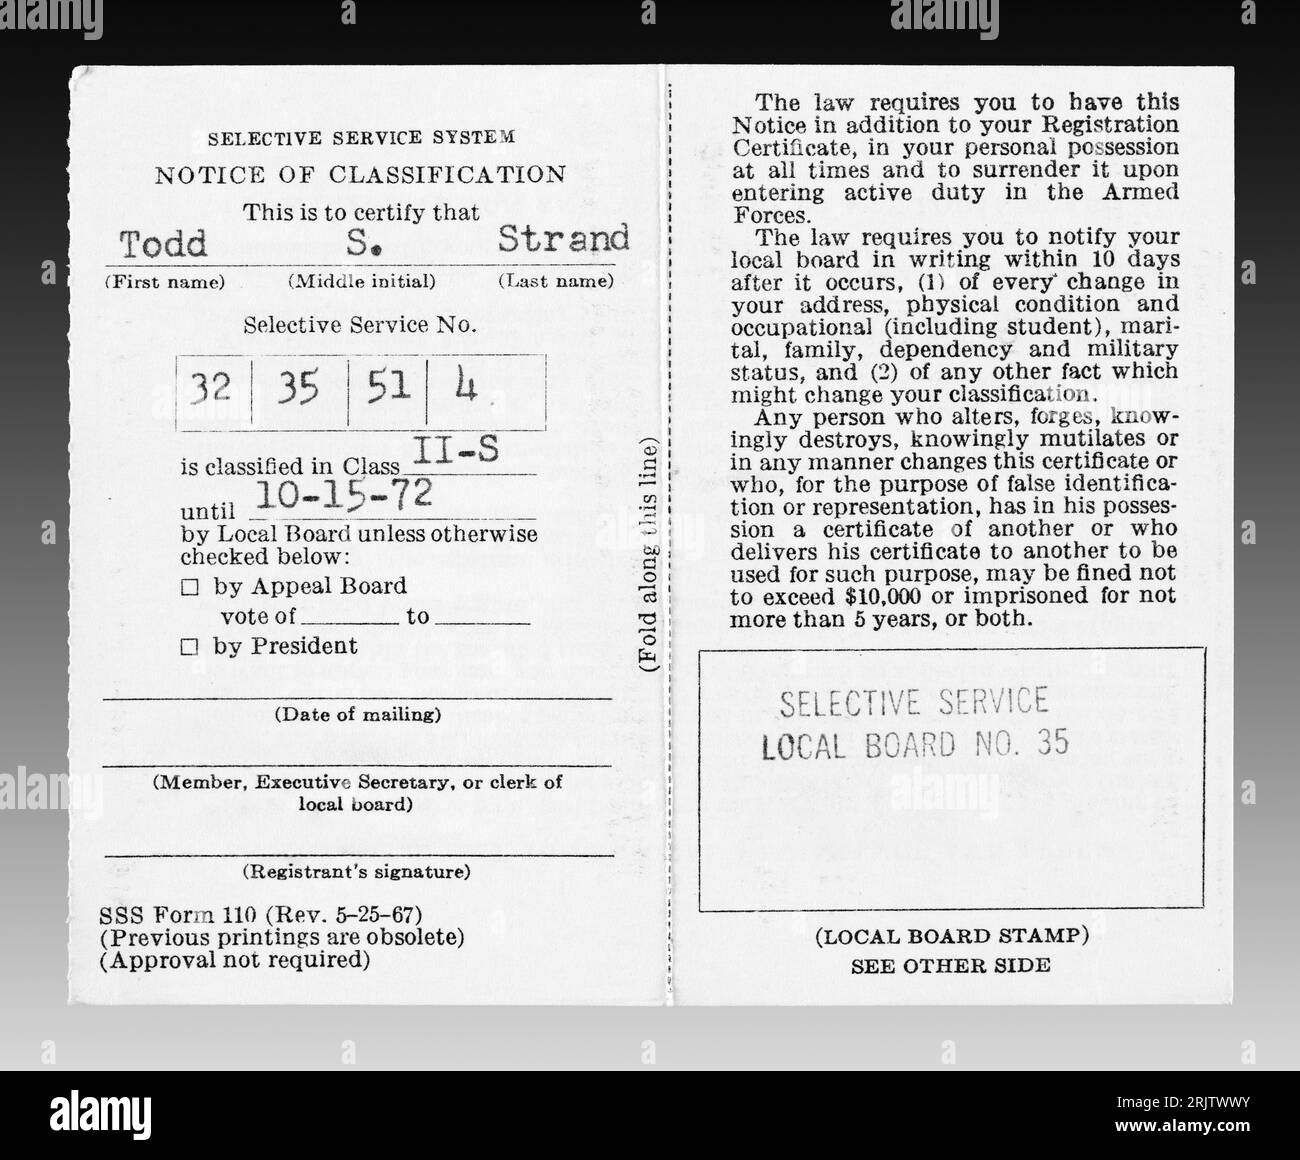 United States Selective Service System draft card from the Vietnam War era with a classification of II-S.  2-S classification indicated the registered Stock Photo